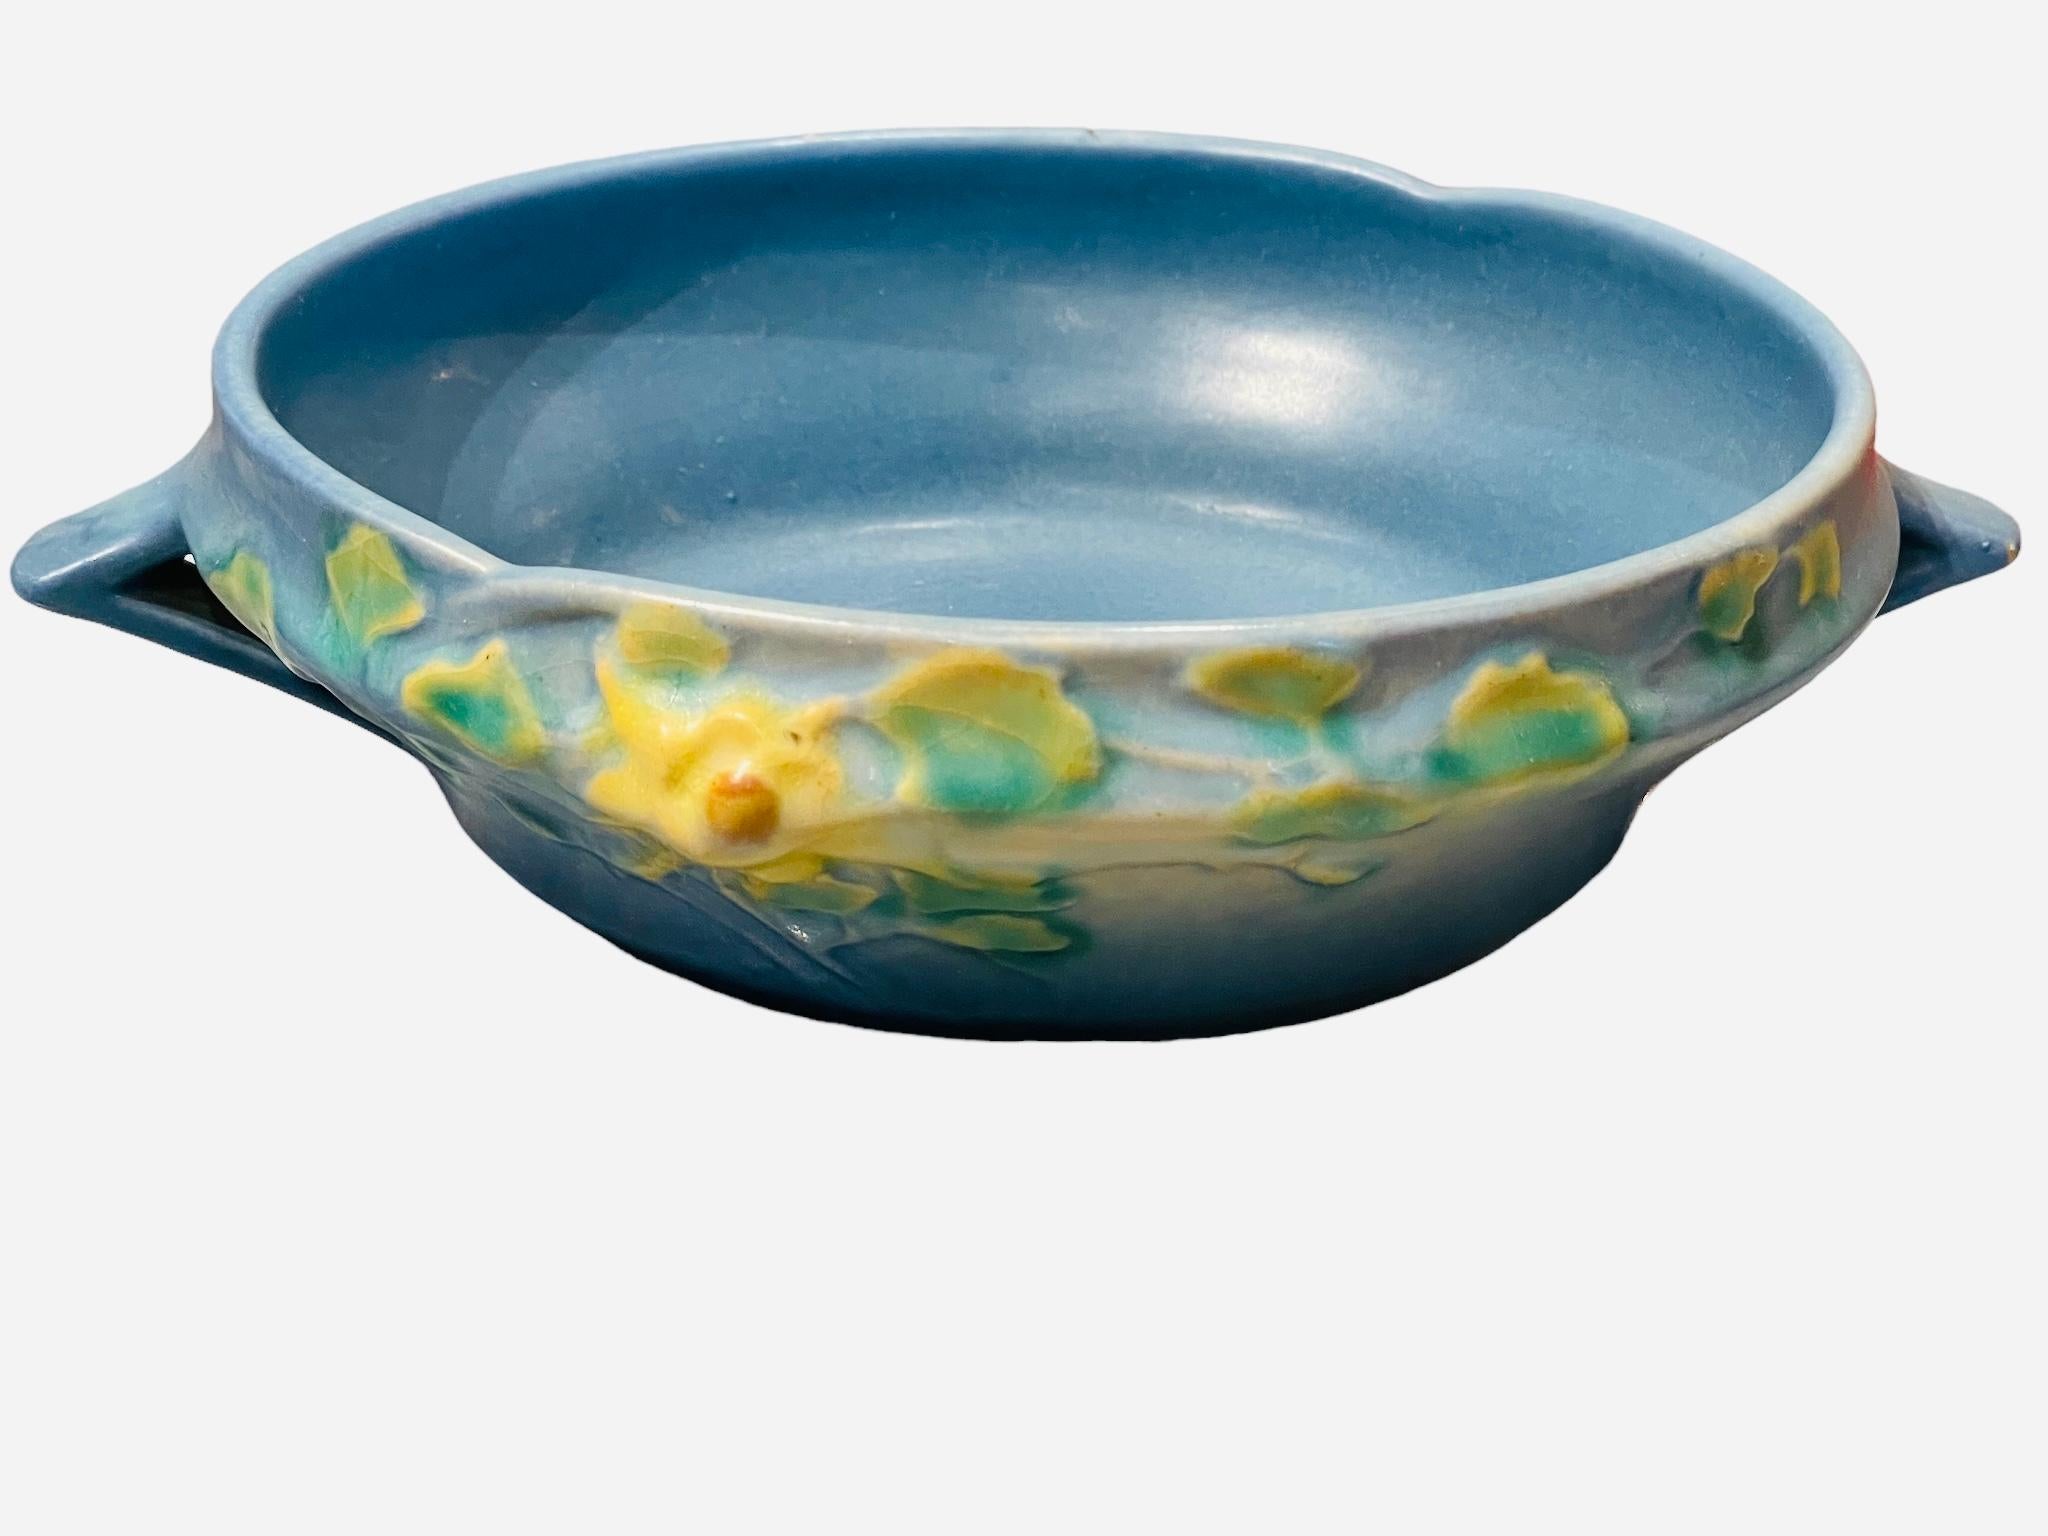 This is a Roseville Art Pottery Columbine pattern bowl. The bowl is blue and is adorned with a branch of yellow Columbine flowers and green/yellow leaves in the front. There are two triangular shaped handles at each side. Below the base is